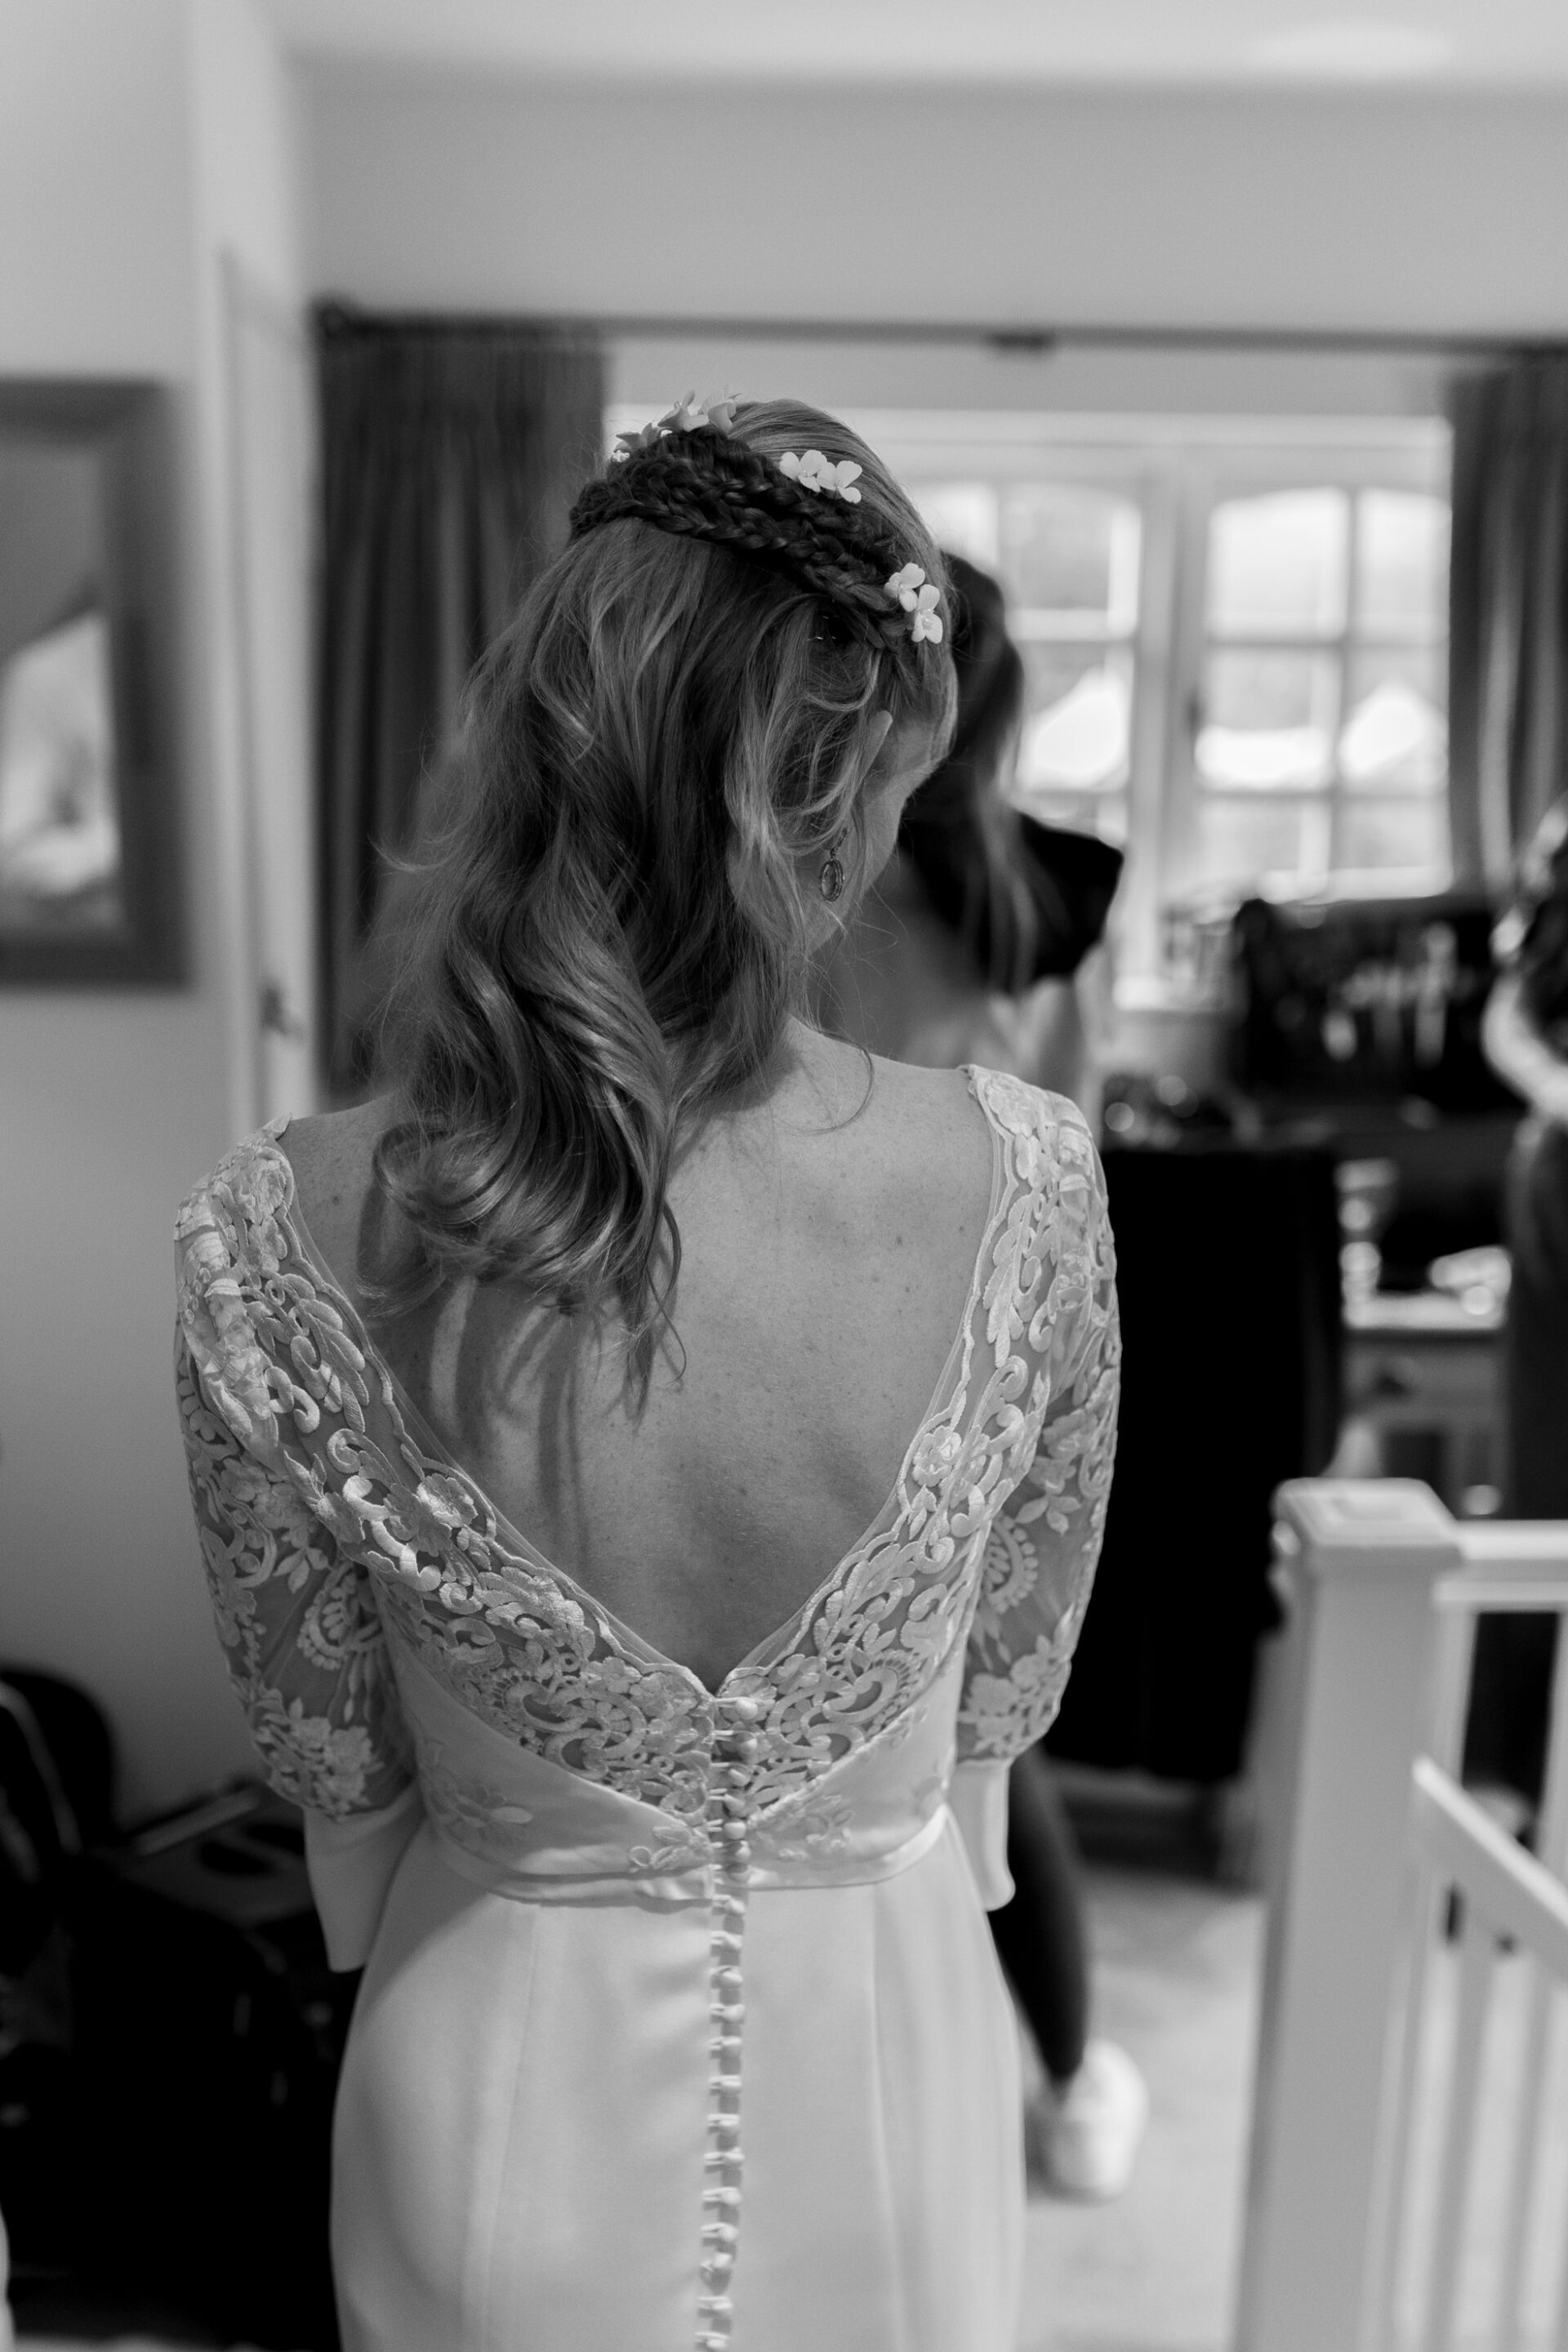 Details of the bride's bespoke wedding dress from Louise Selby